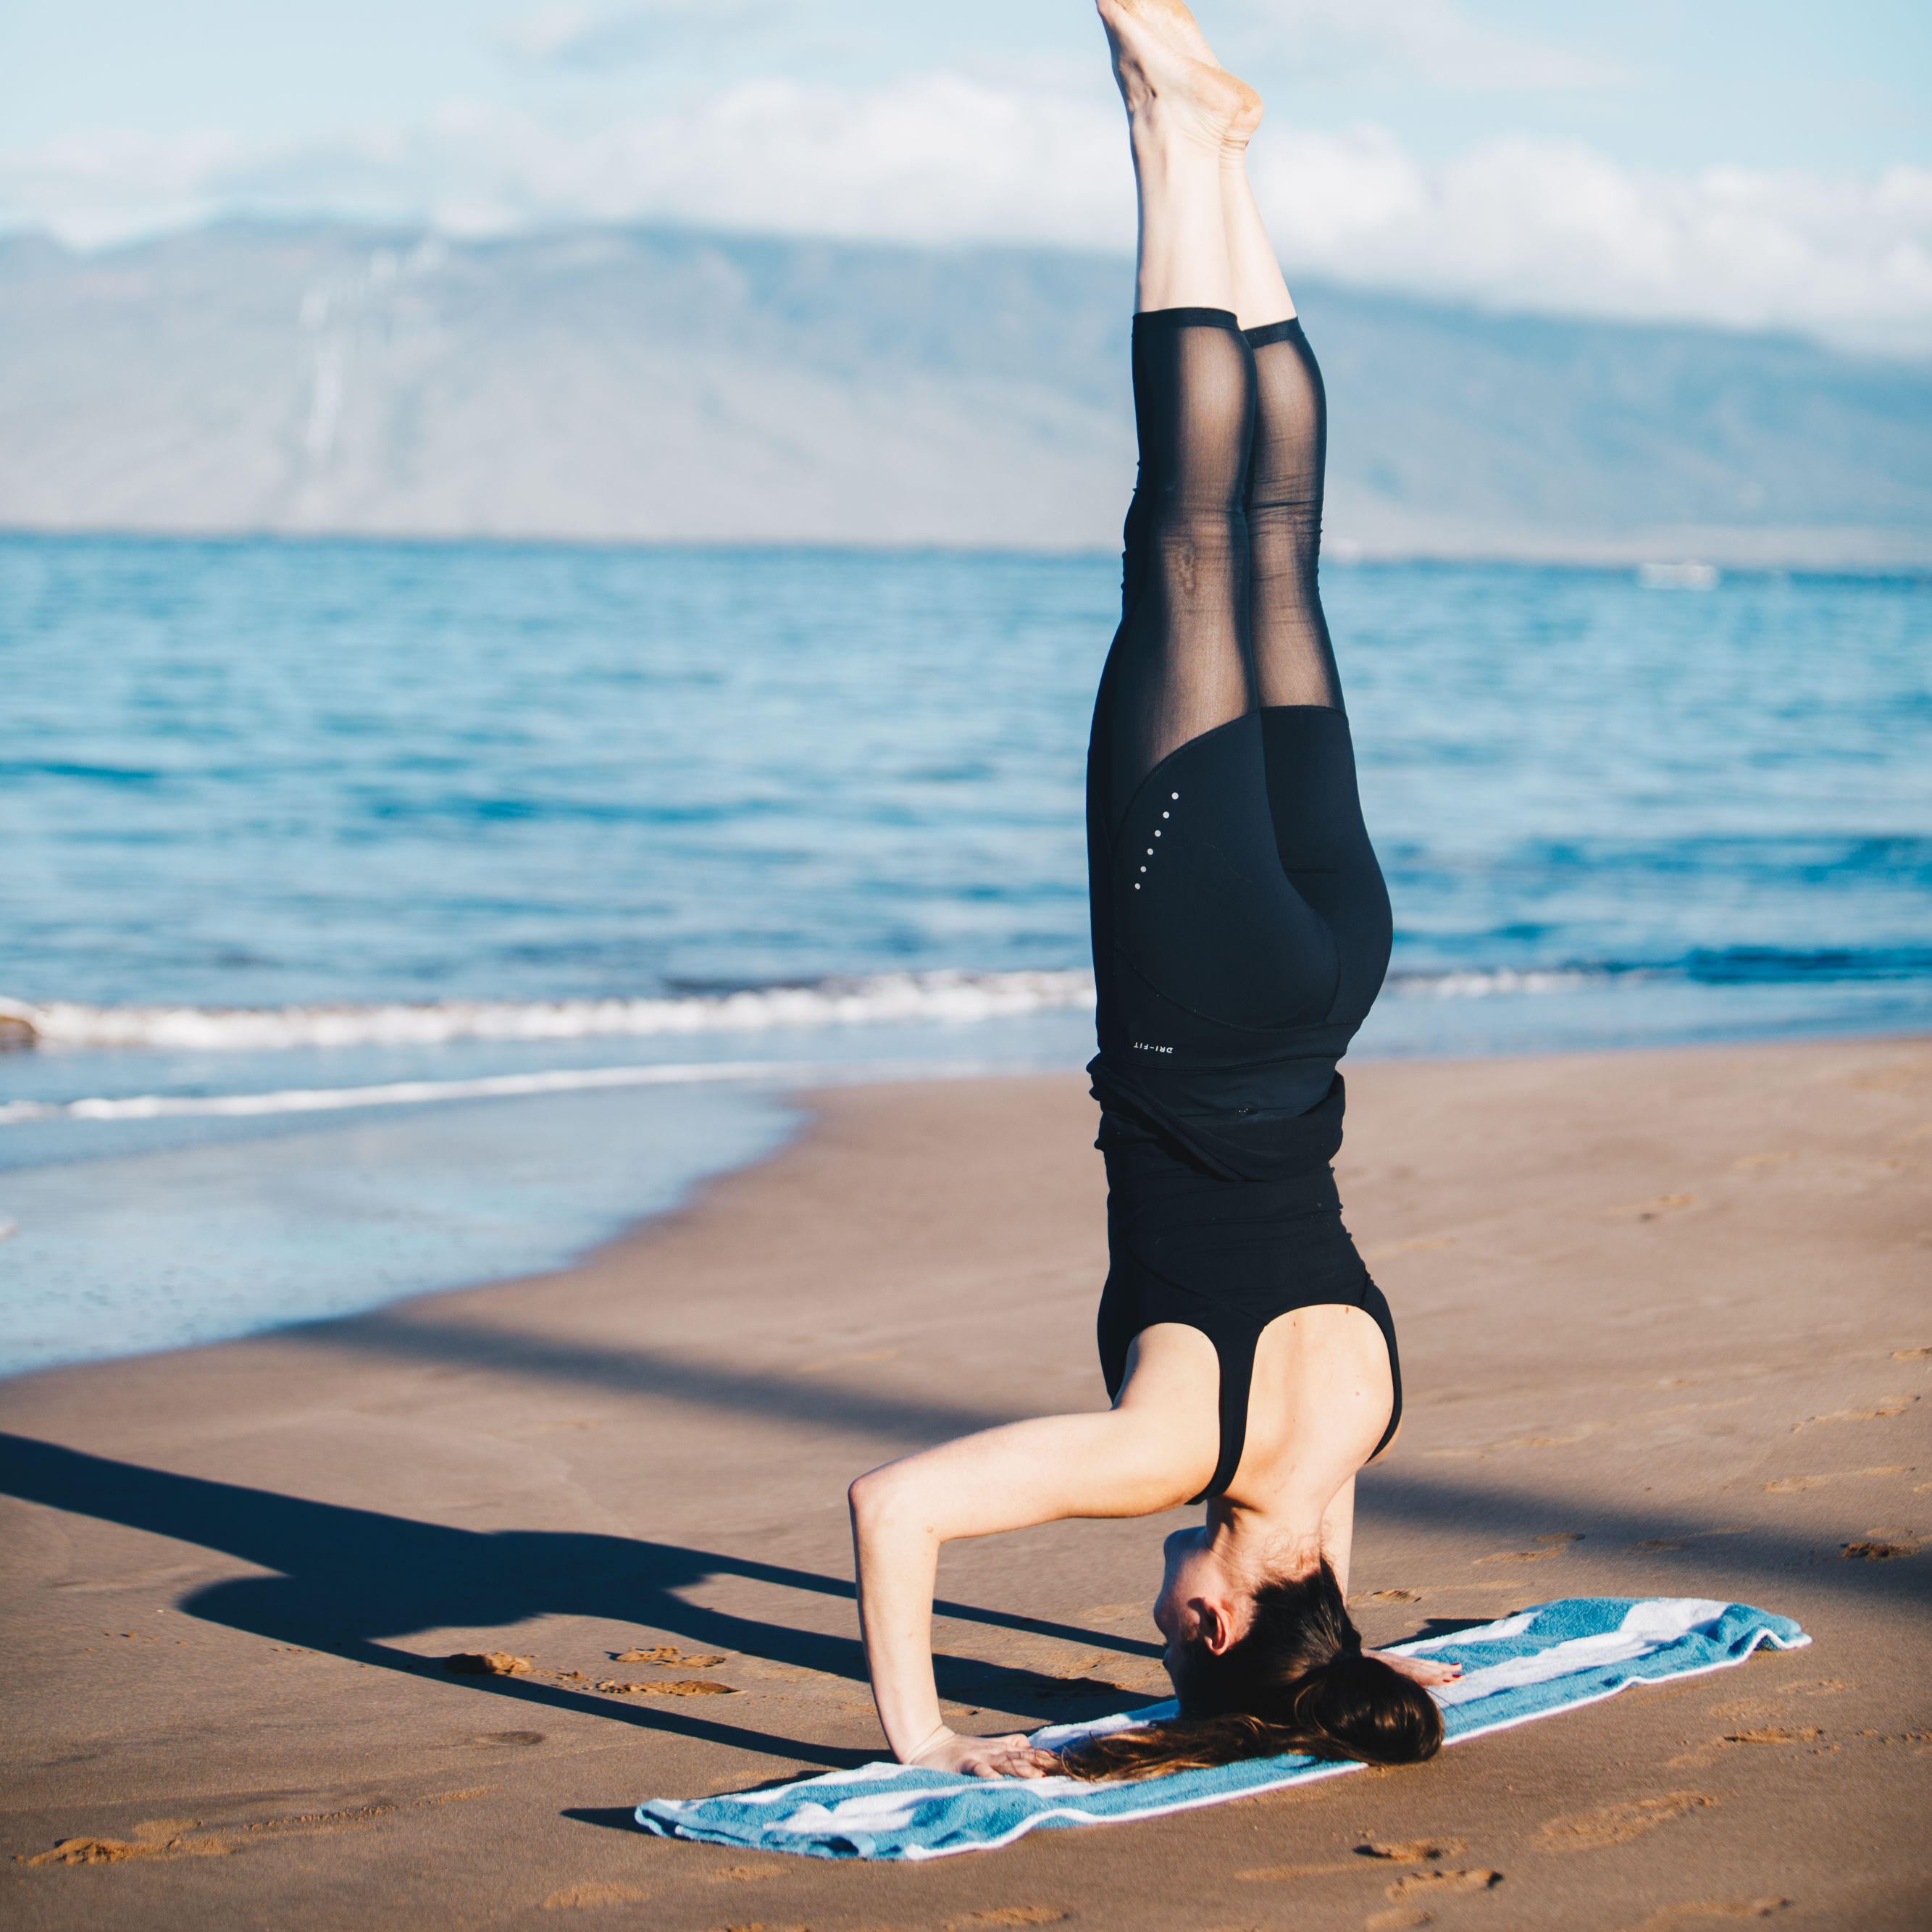 Woman doing a headstand on the beach